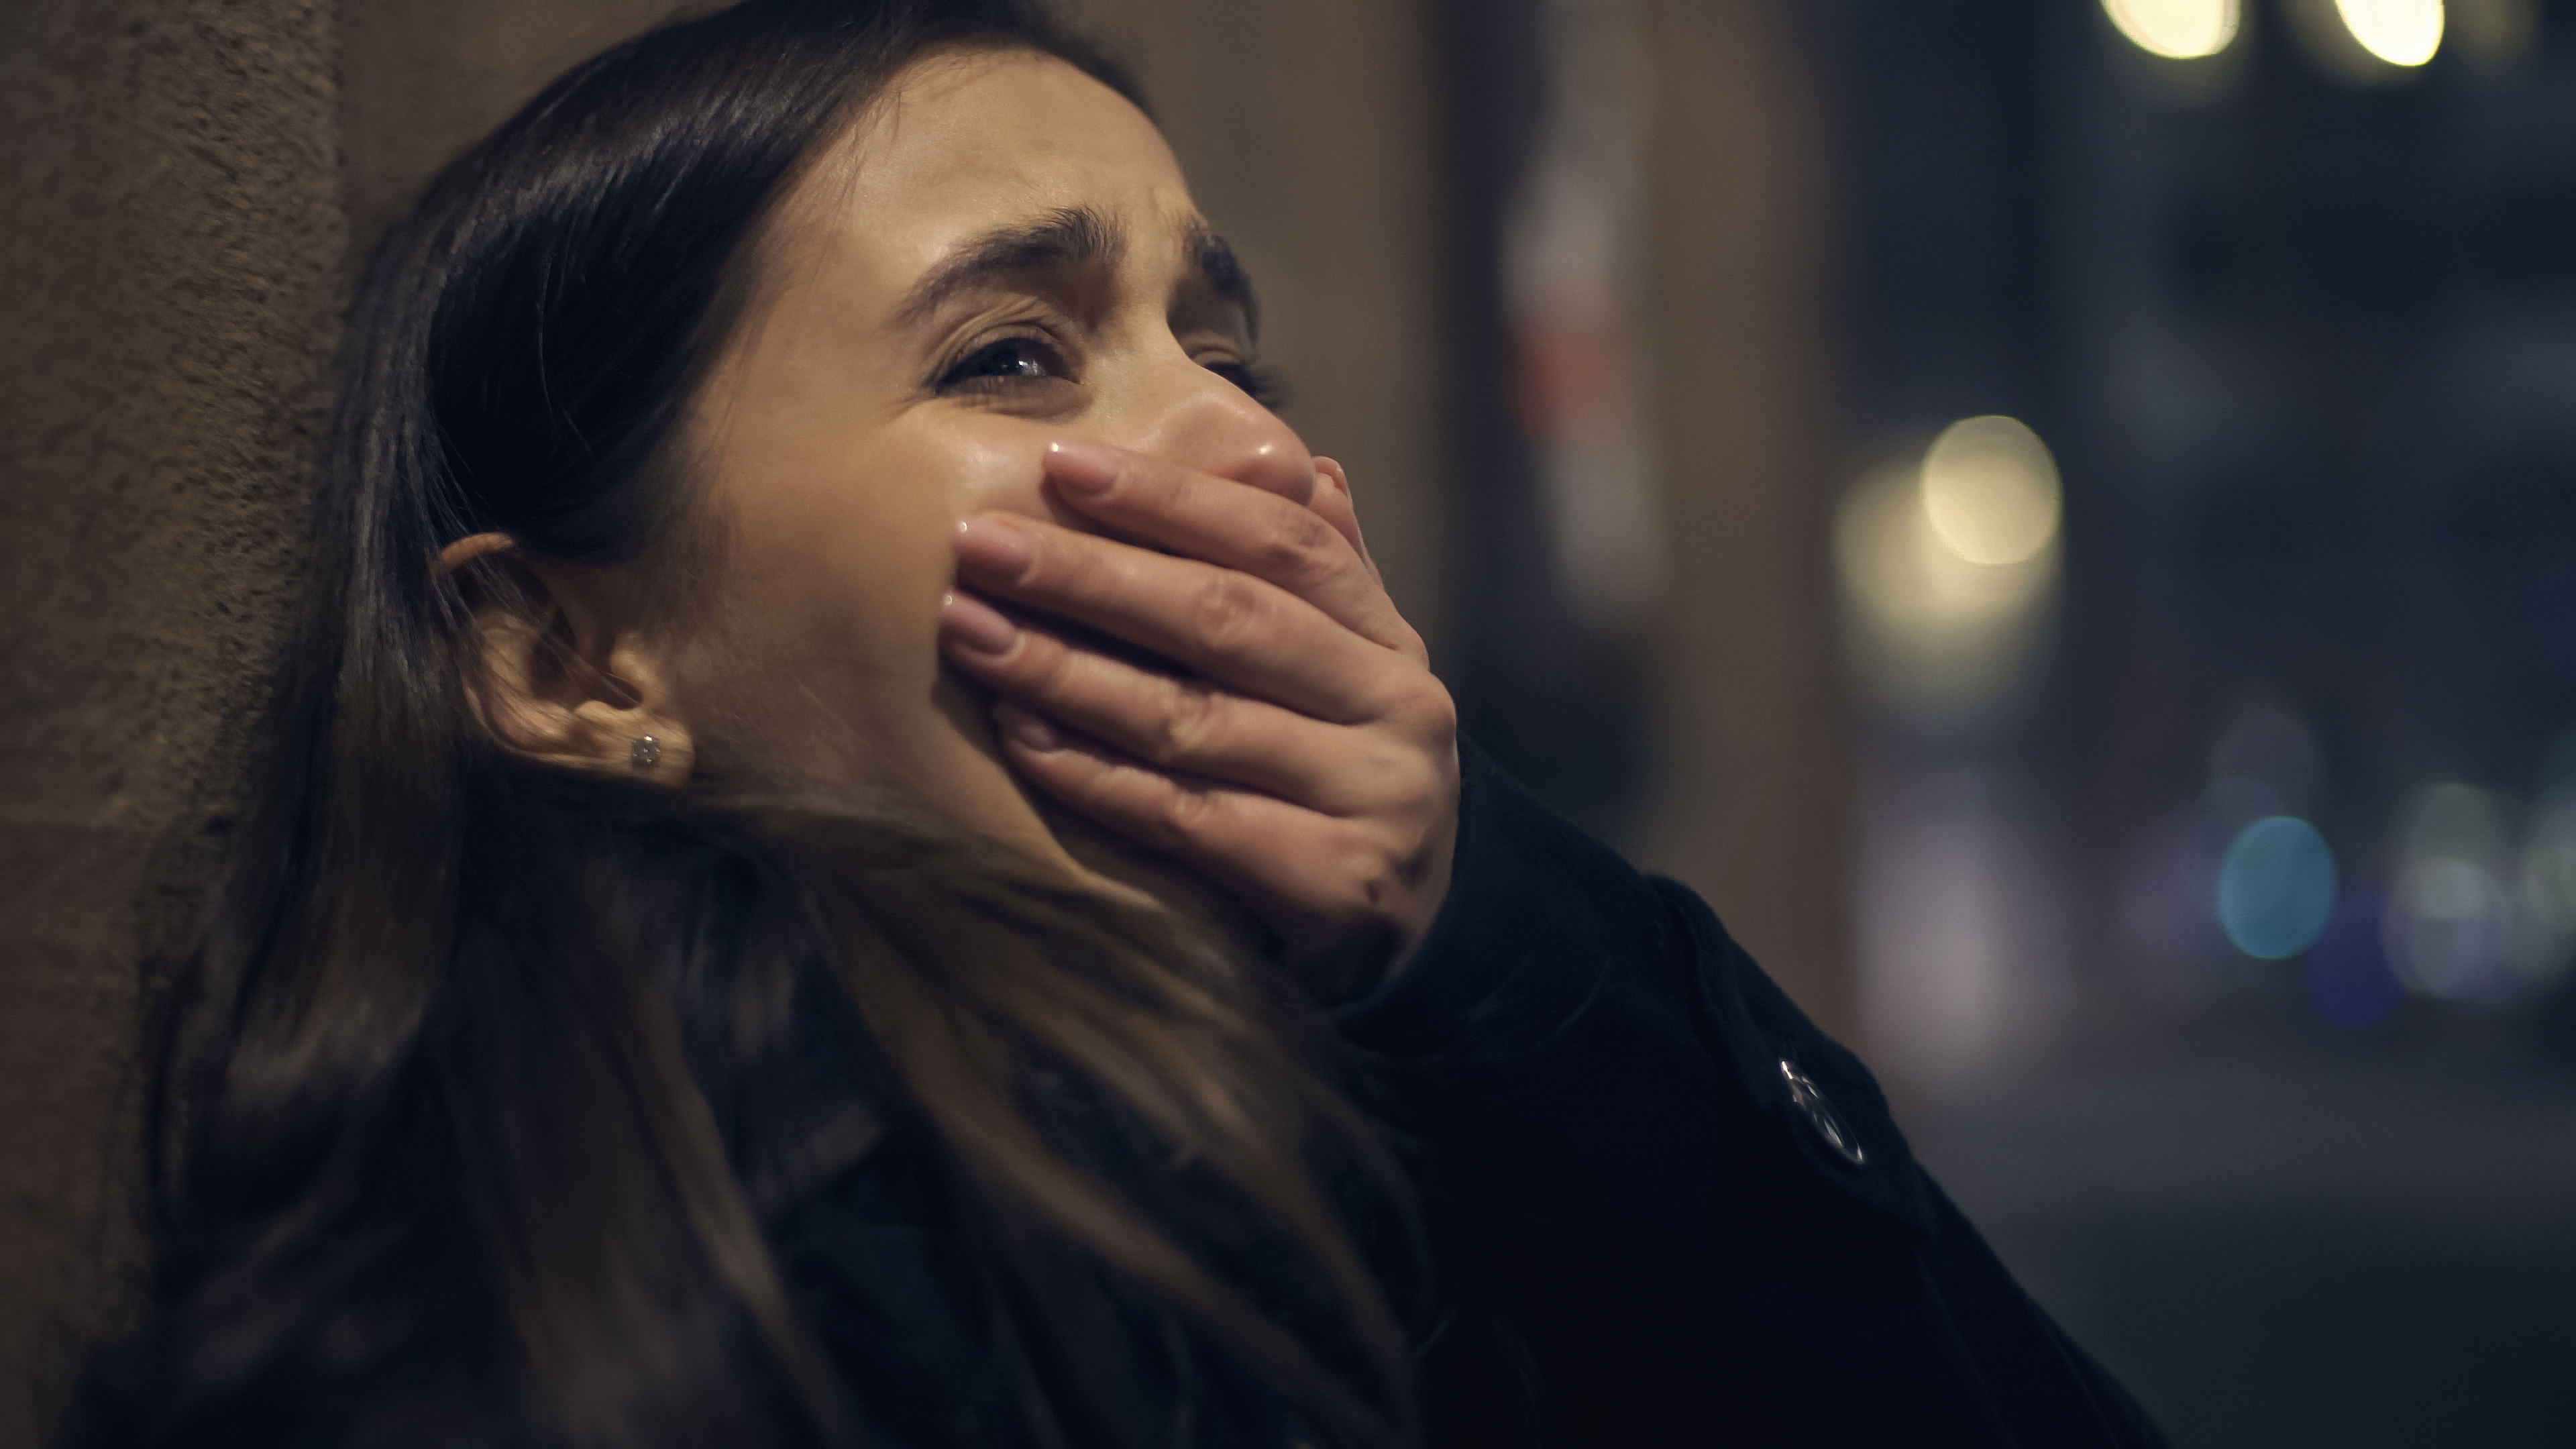 A scared woman crying with her hand clasped over her mouth | Source: Shutterstock